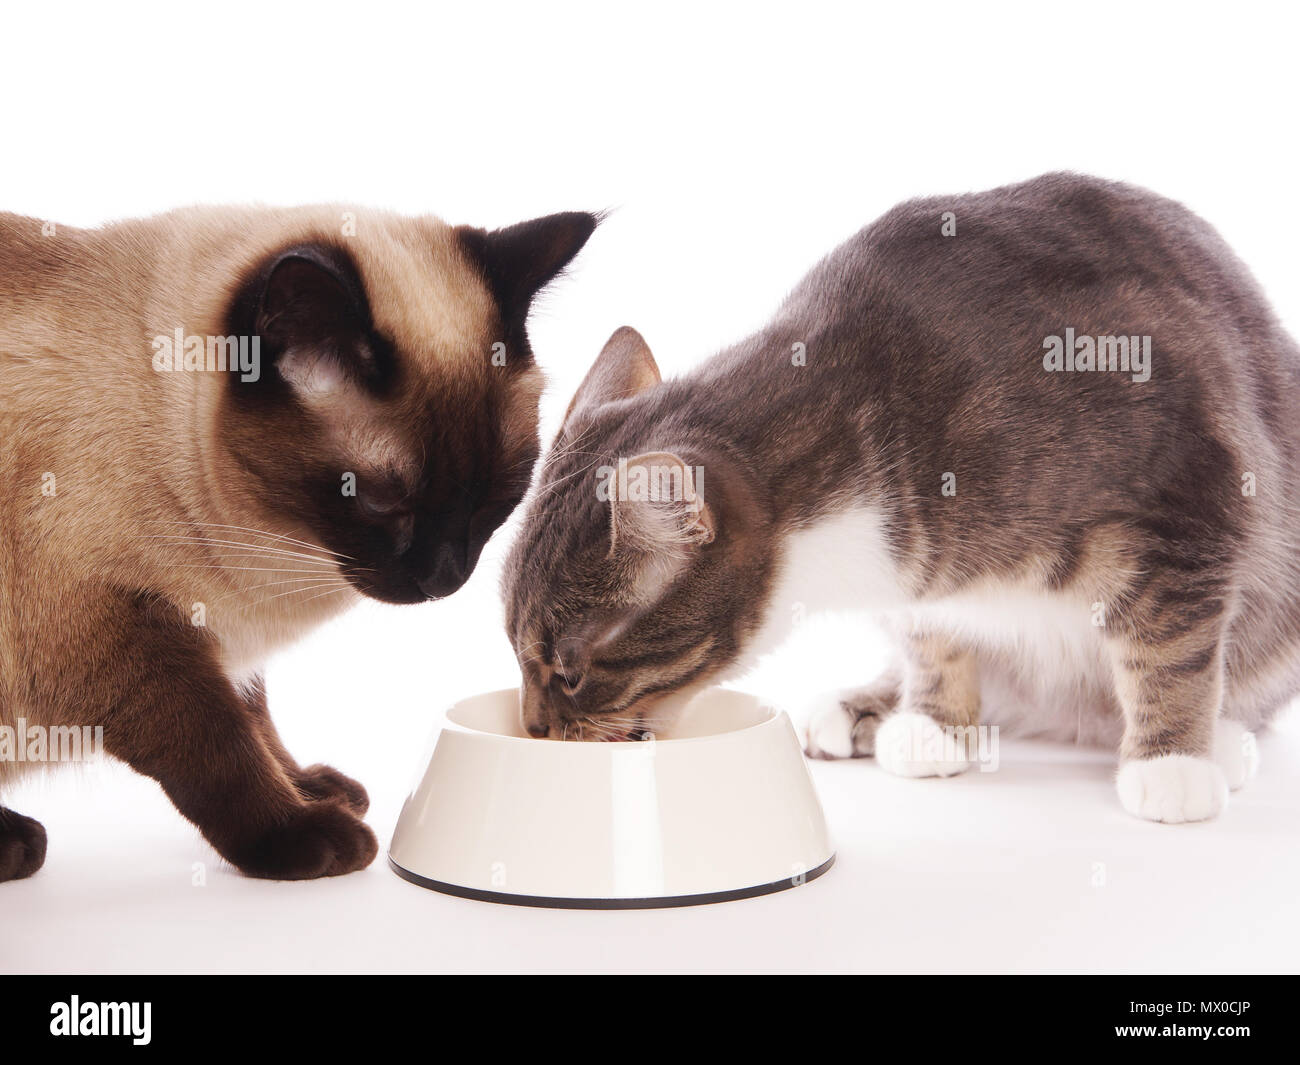 two domestic cats eating from same feeding bowl sharing cat food, studio setting with white background Stock Photo